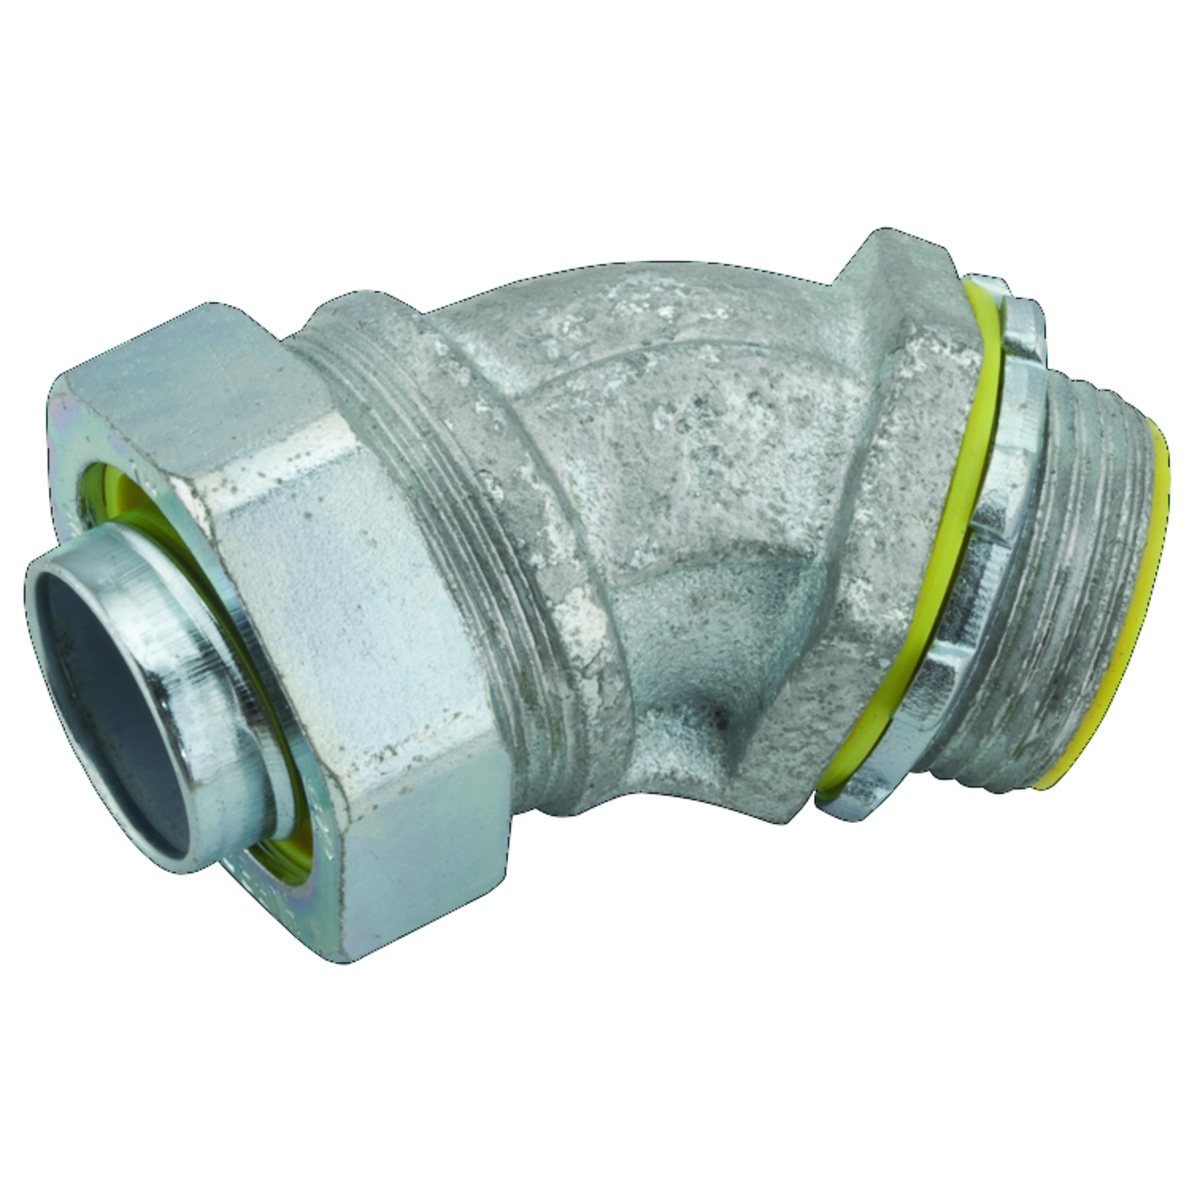 RACO 3566 1-1/2" 45D INSULATED LIQUIDTIGHT CONNECTOR